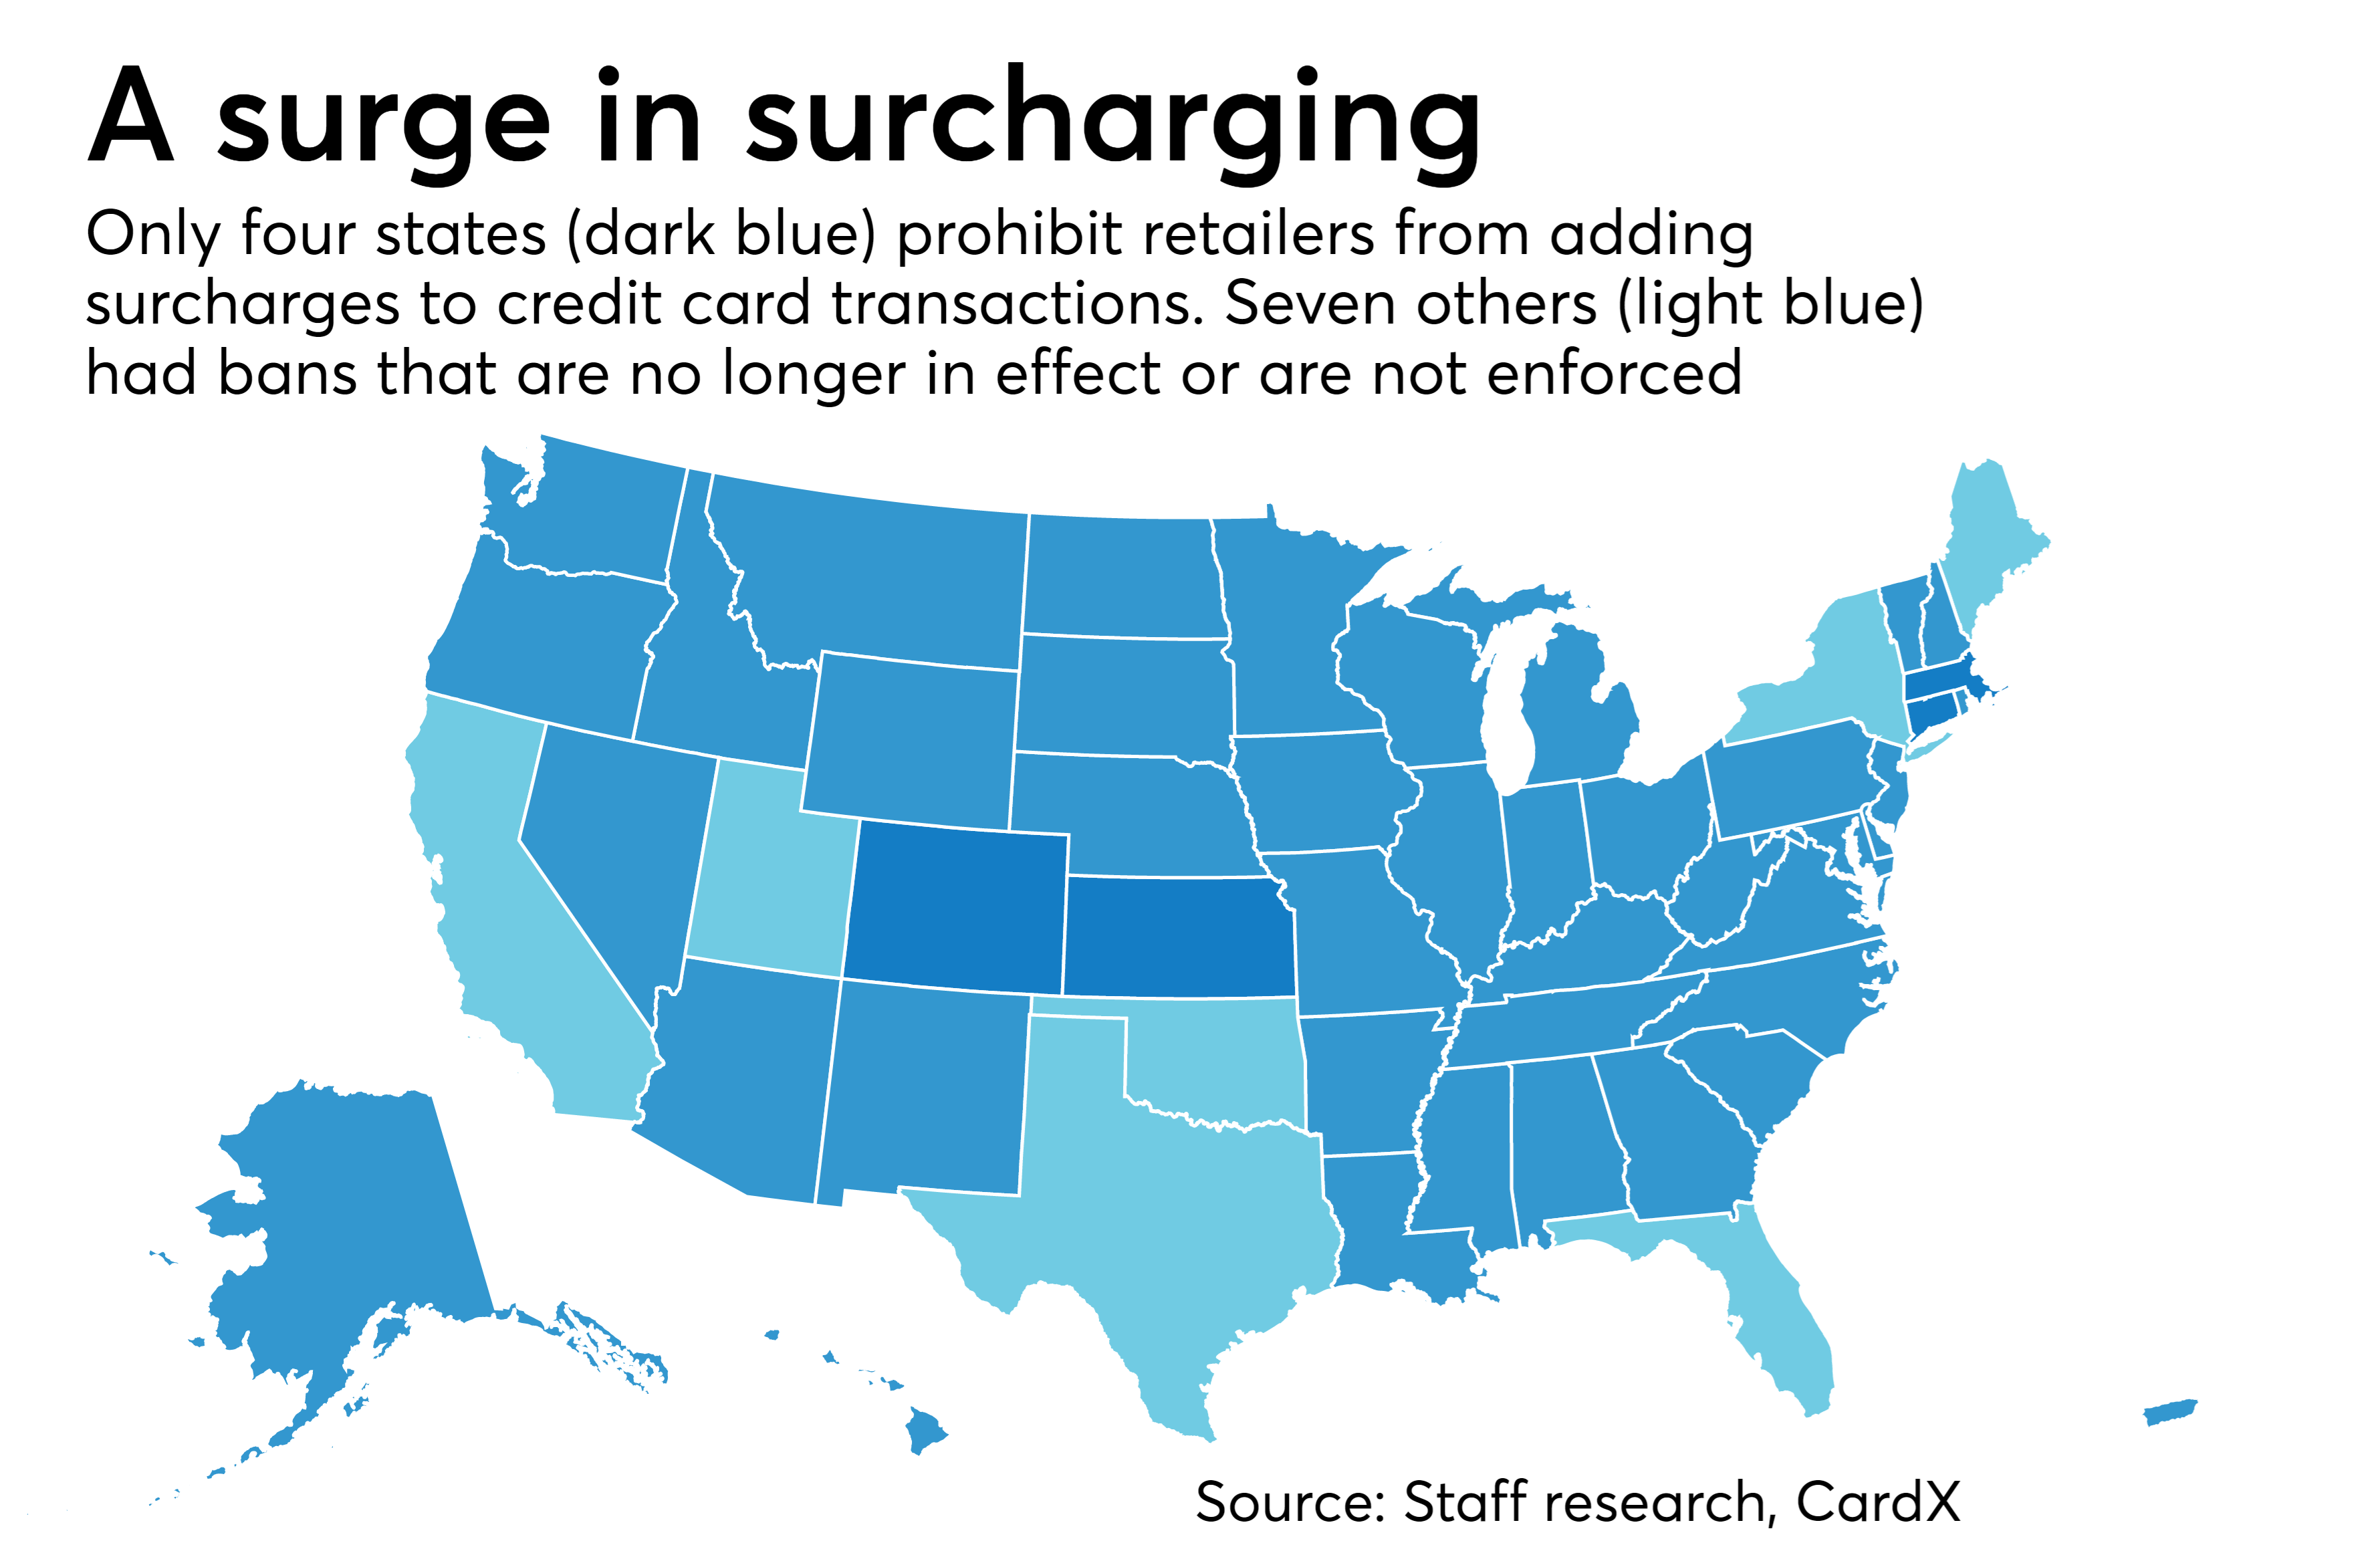 Once banned, credit card surcharges gain momentum MAPS Zero